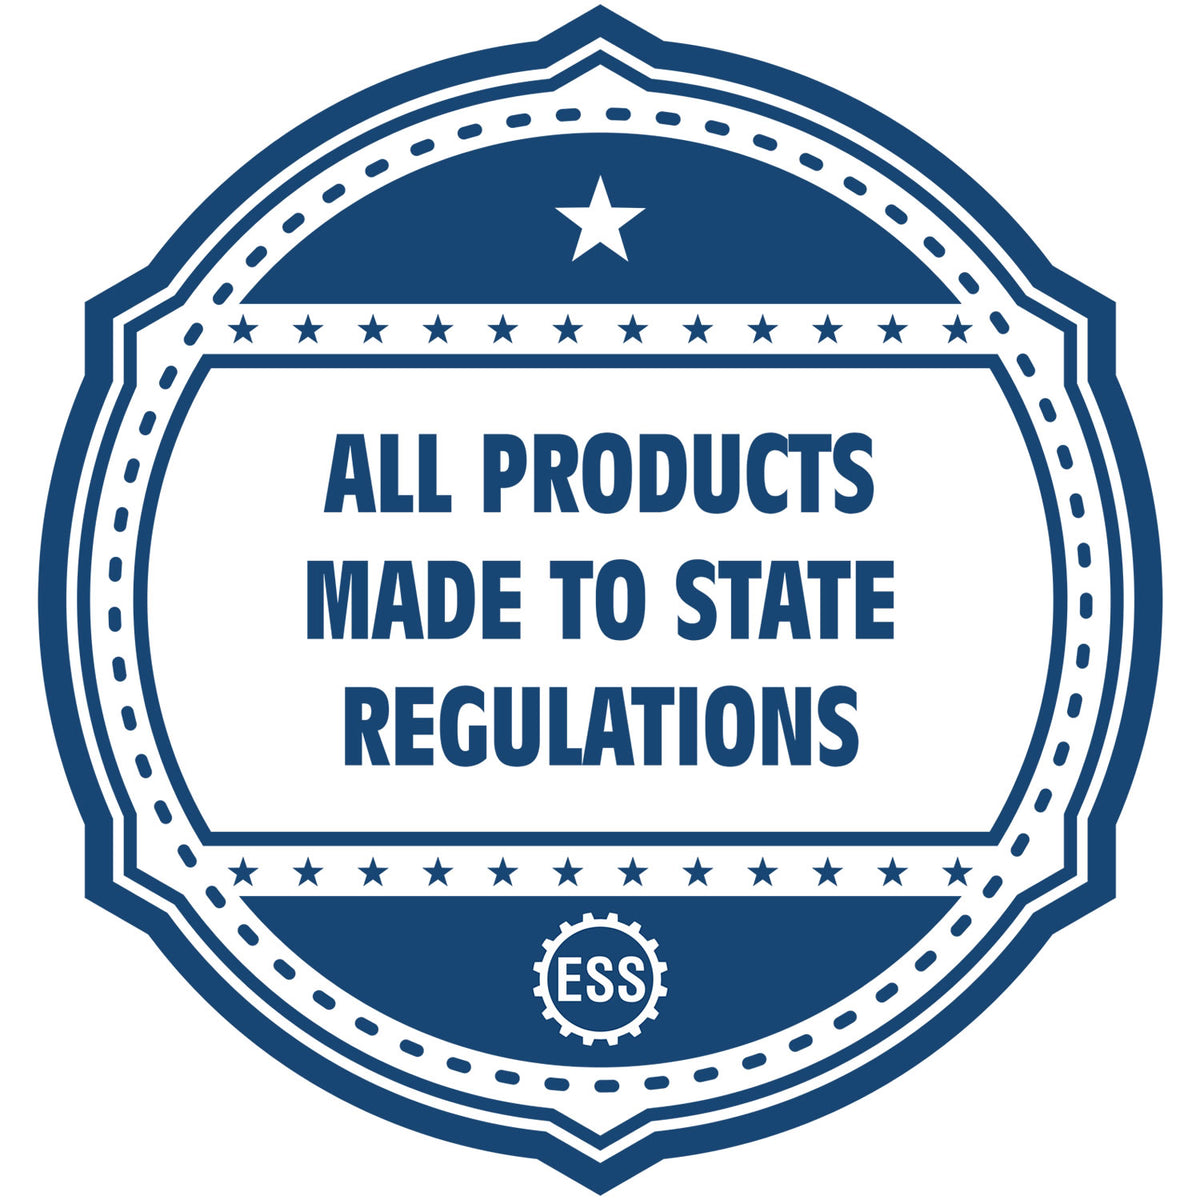 An icon or badge element for the Soft Pocket Georgia Landscape Architect Embosser showing that this product is made in compliance with state regulations.